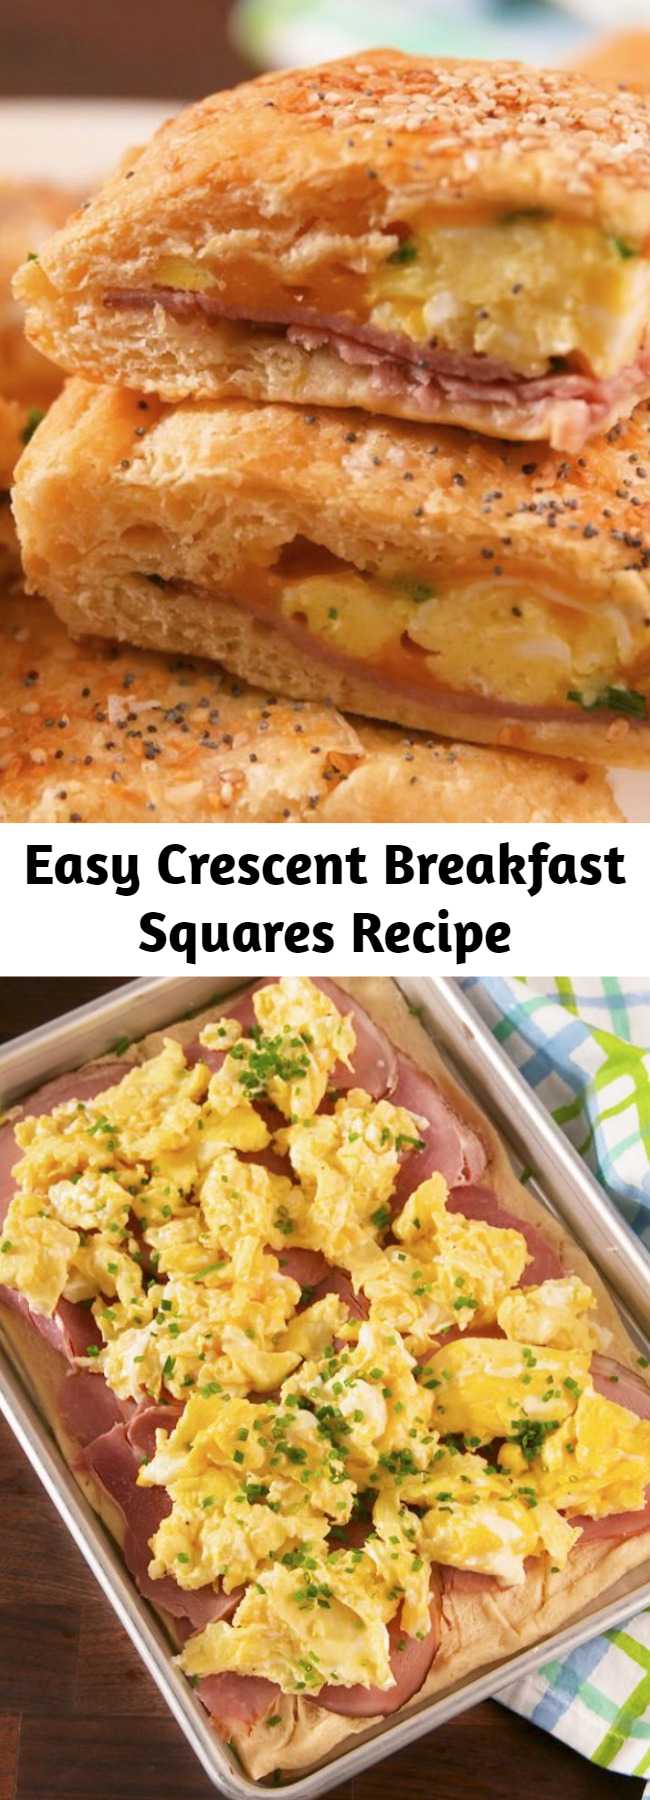 Easy Crescent Breakfast Squares Recipe - We love ourselves a good crescent dough hack, and this one is one of our faves. Look for dough you can buy as a full sheet (as opposed to the kind with perforated edges). It's not totally necessary, but it'll make things easier to assemble. #easy #recipe #eggs #cheese #crescentdough #dough #breakfast #brunch #ham #sheetpan #squares